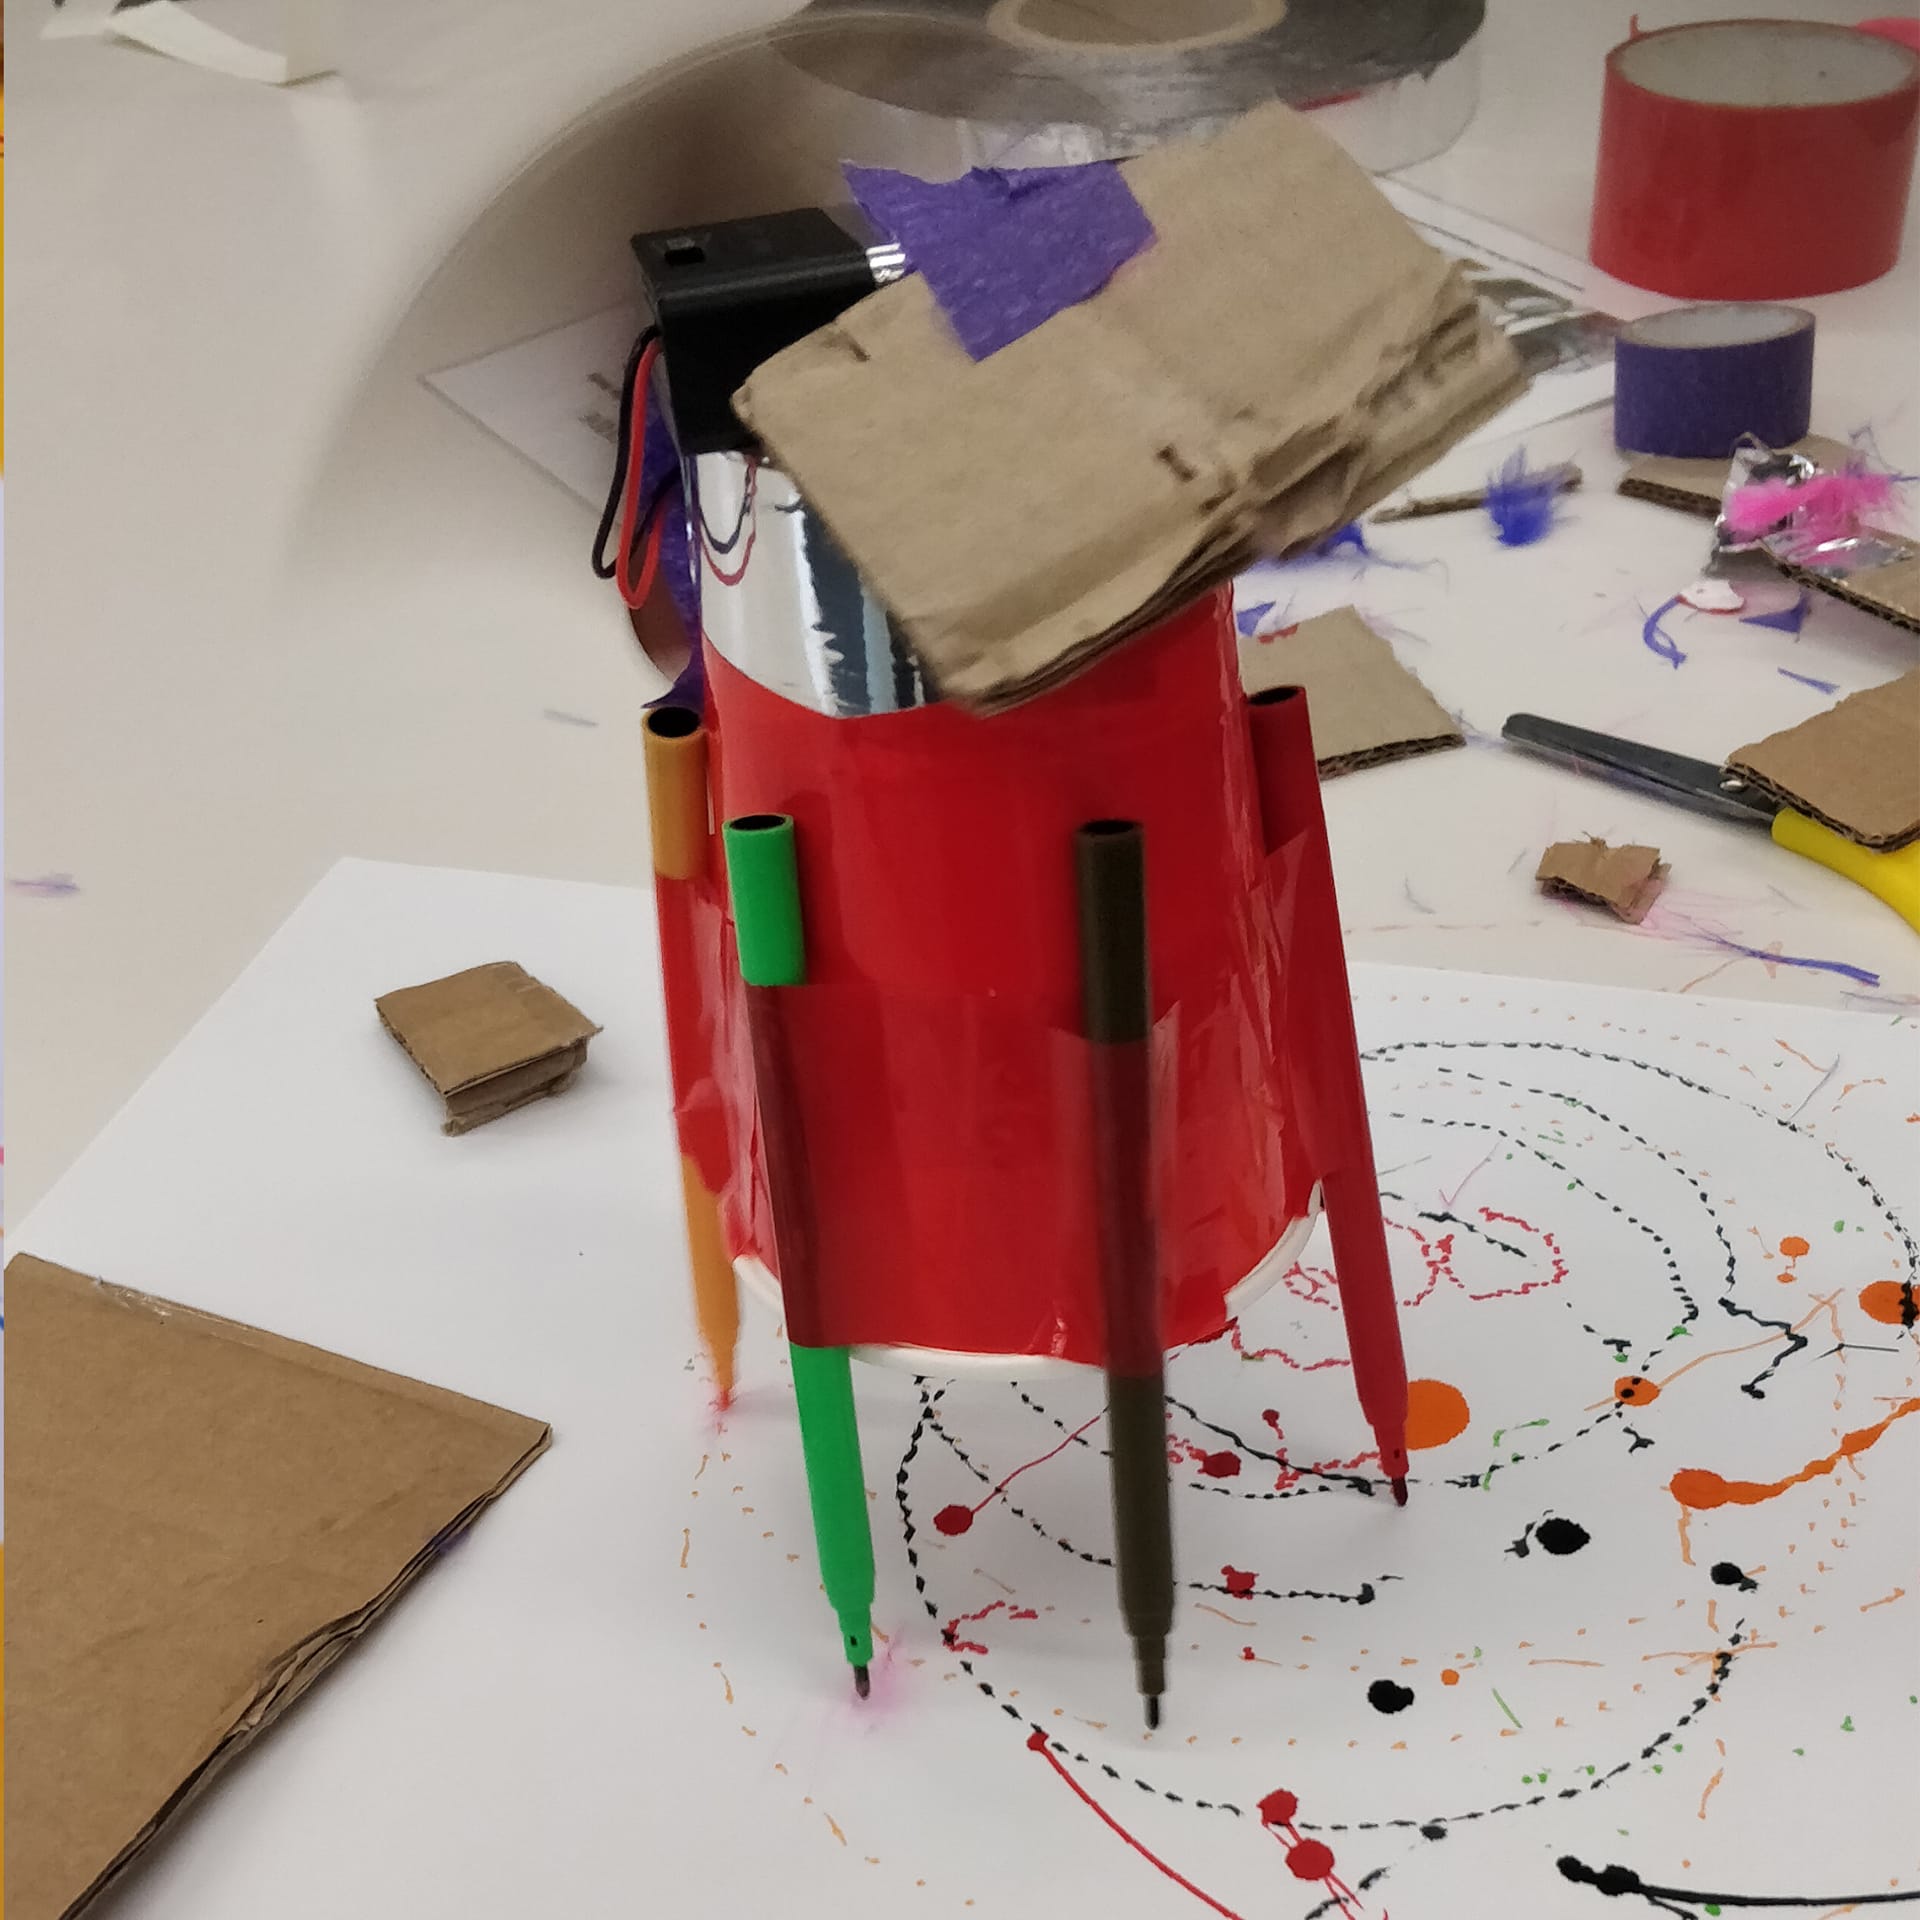 A cup attached to coloured felt tips and a motor to scribble by itself